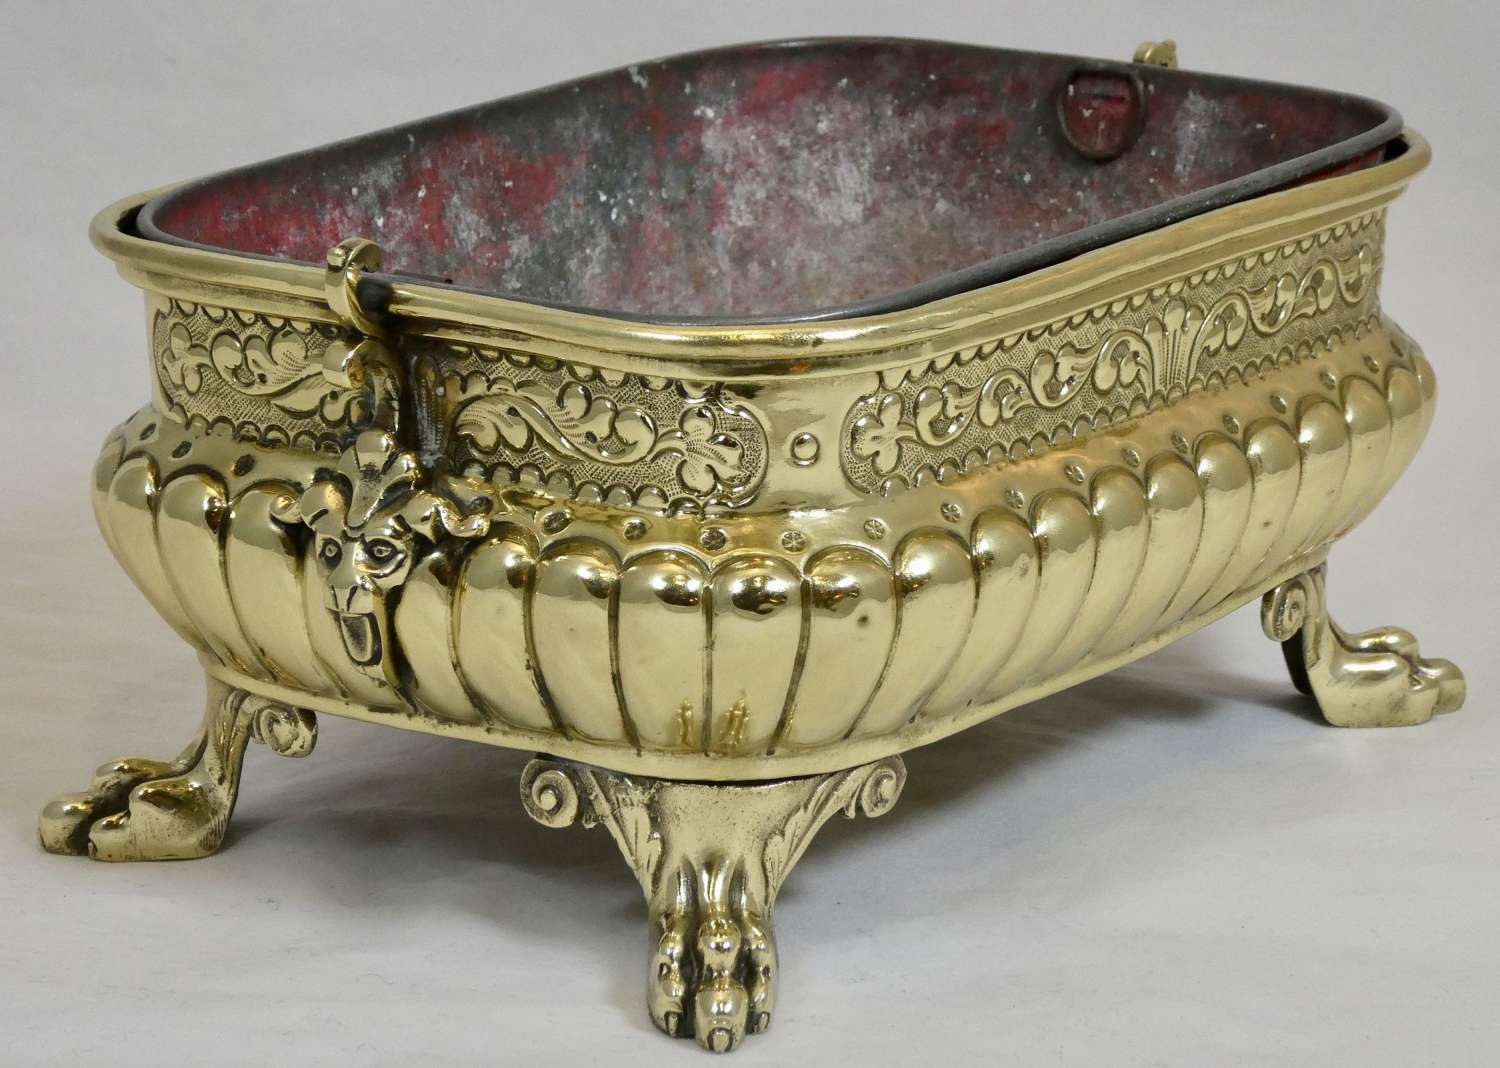 Small Oblong Jardinière, late 19th Century